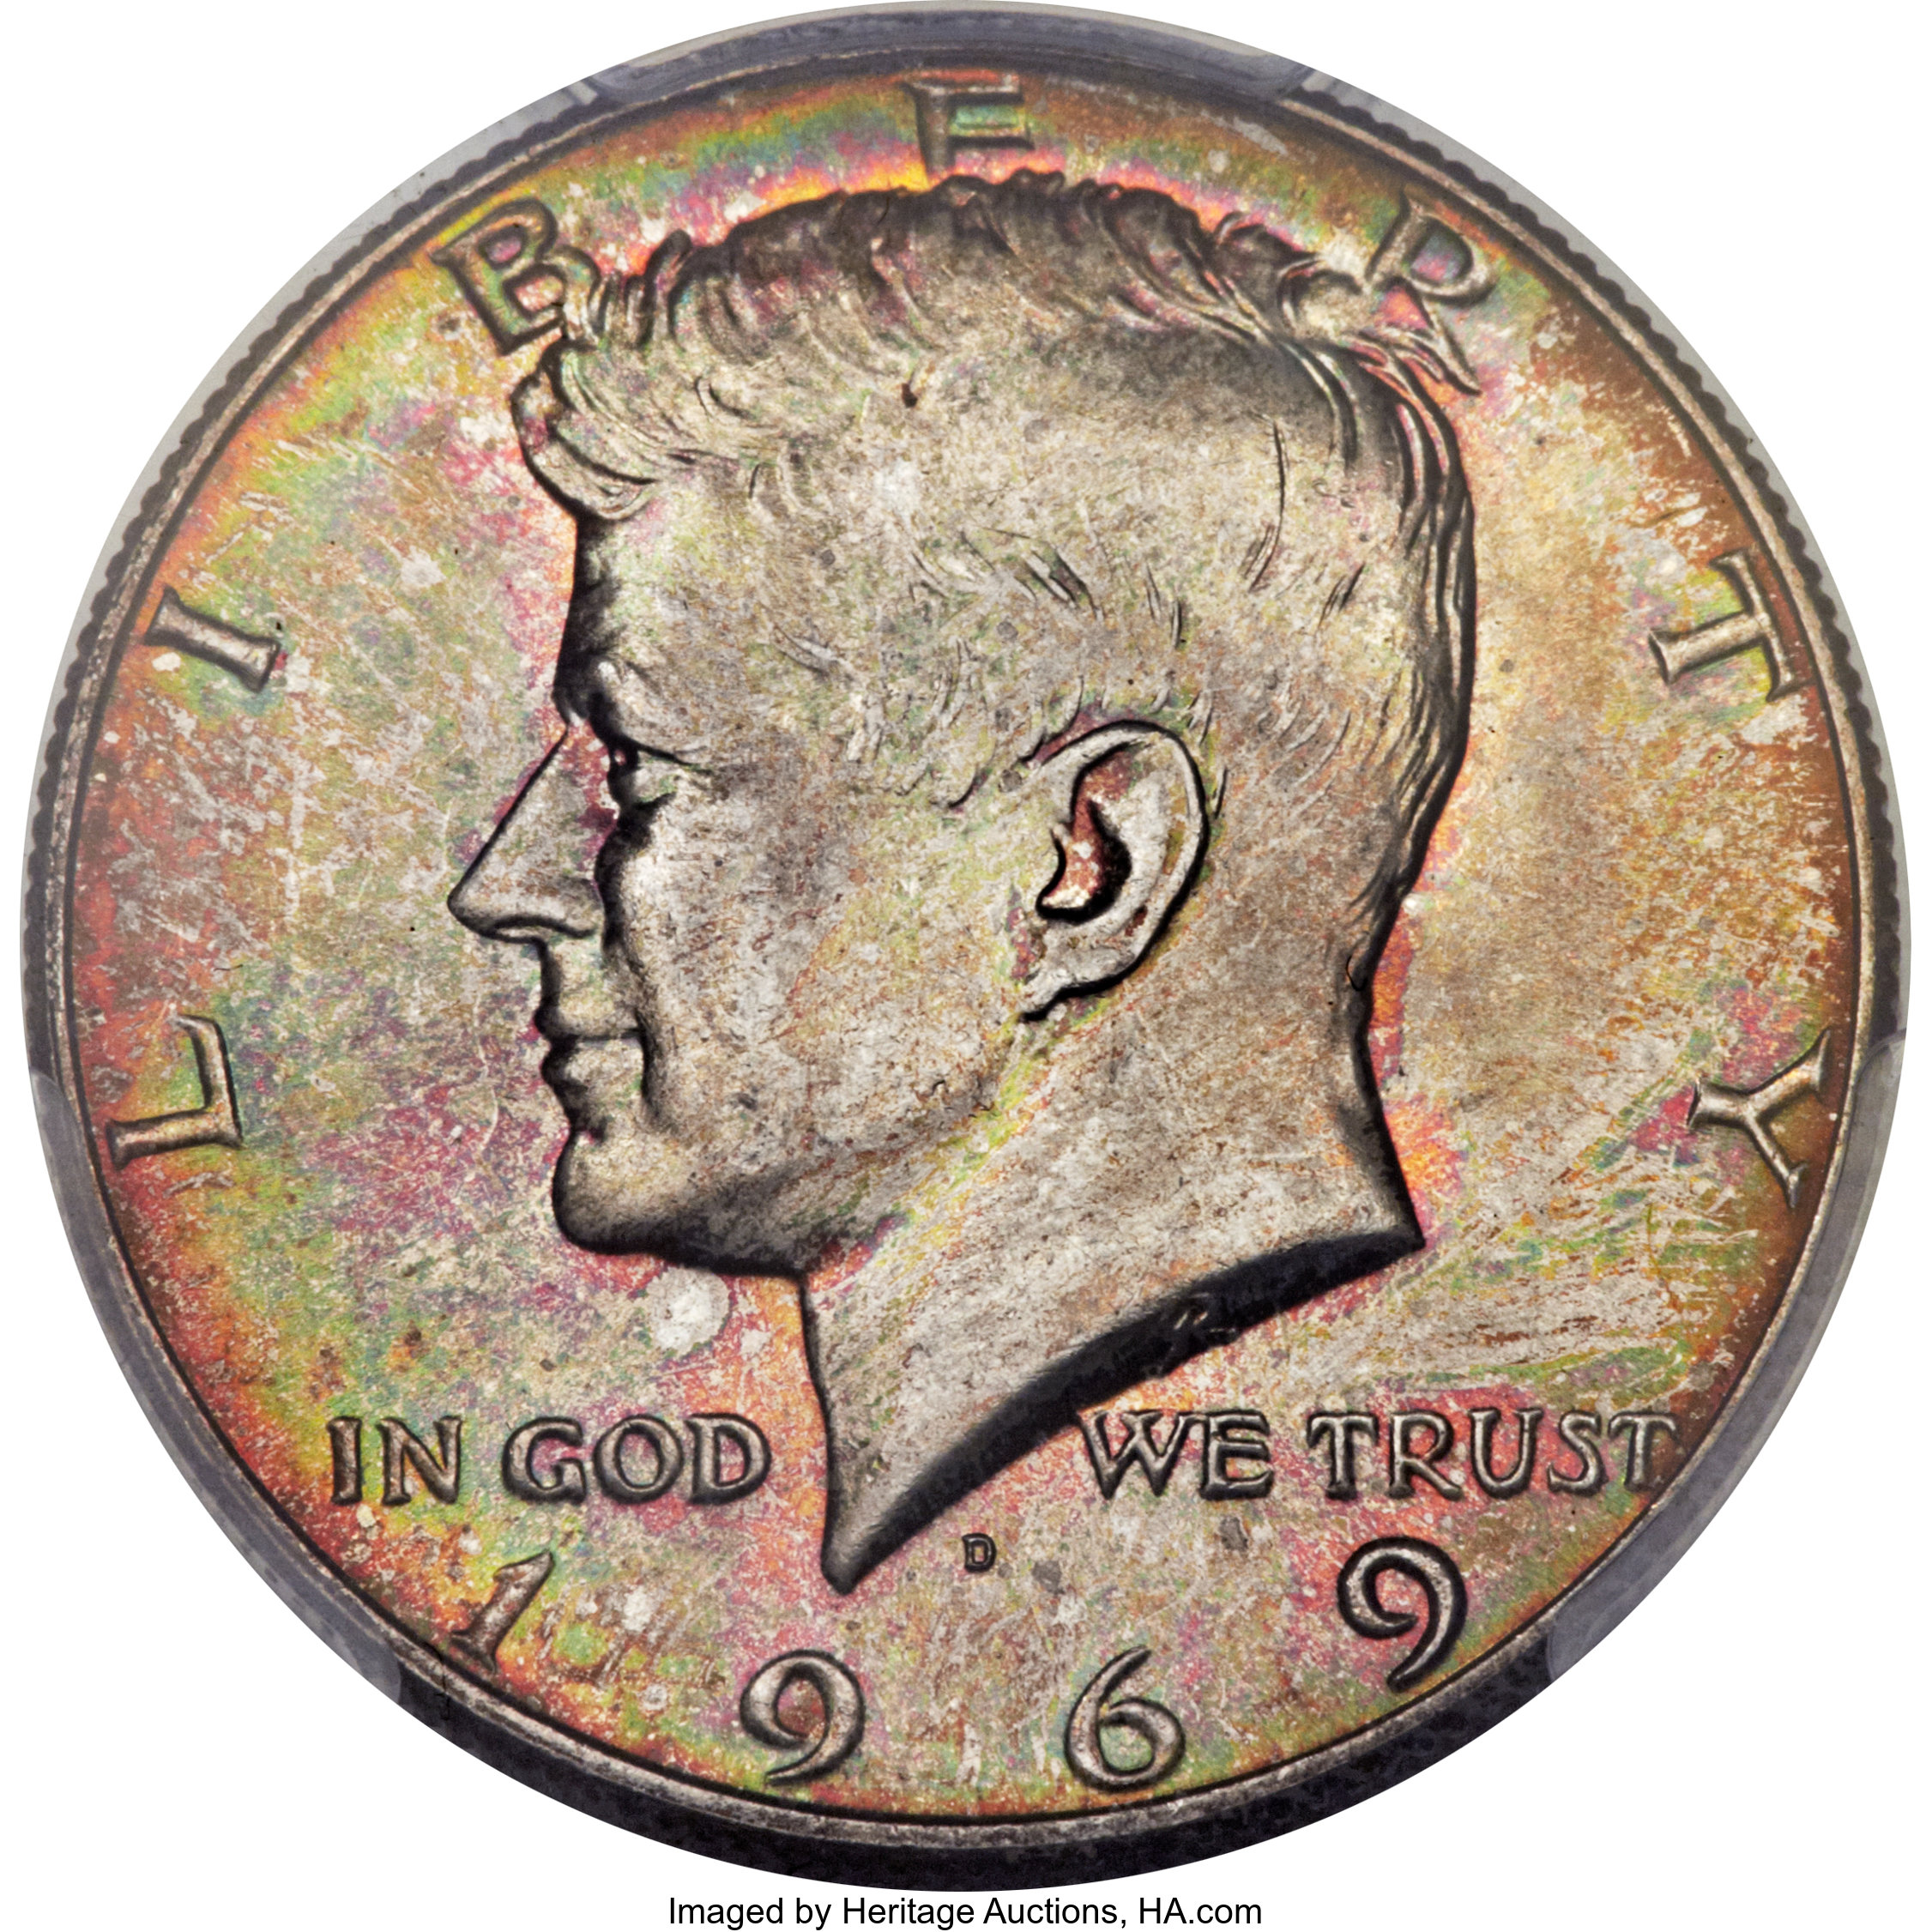 2012 S CLAD KENNEDY HALF DOLLAR-PROOF FROSTED CAMEO 